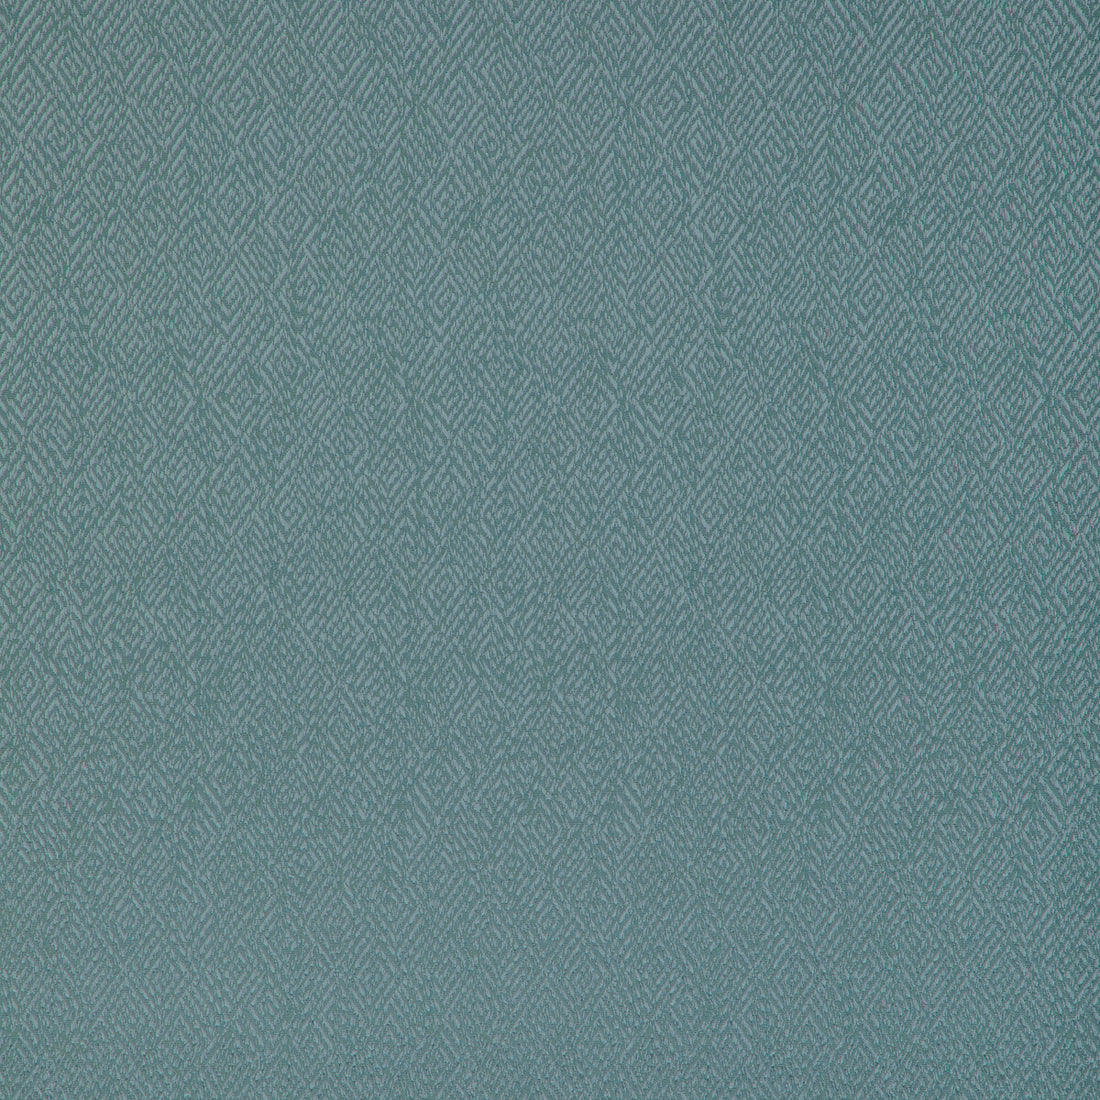 Pipet Texture fabric in aqua color - pattern 8023152.13.0 - by Brunschwig &amp; Fils in the Vienne Silks collection